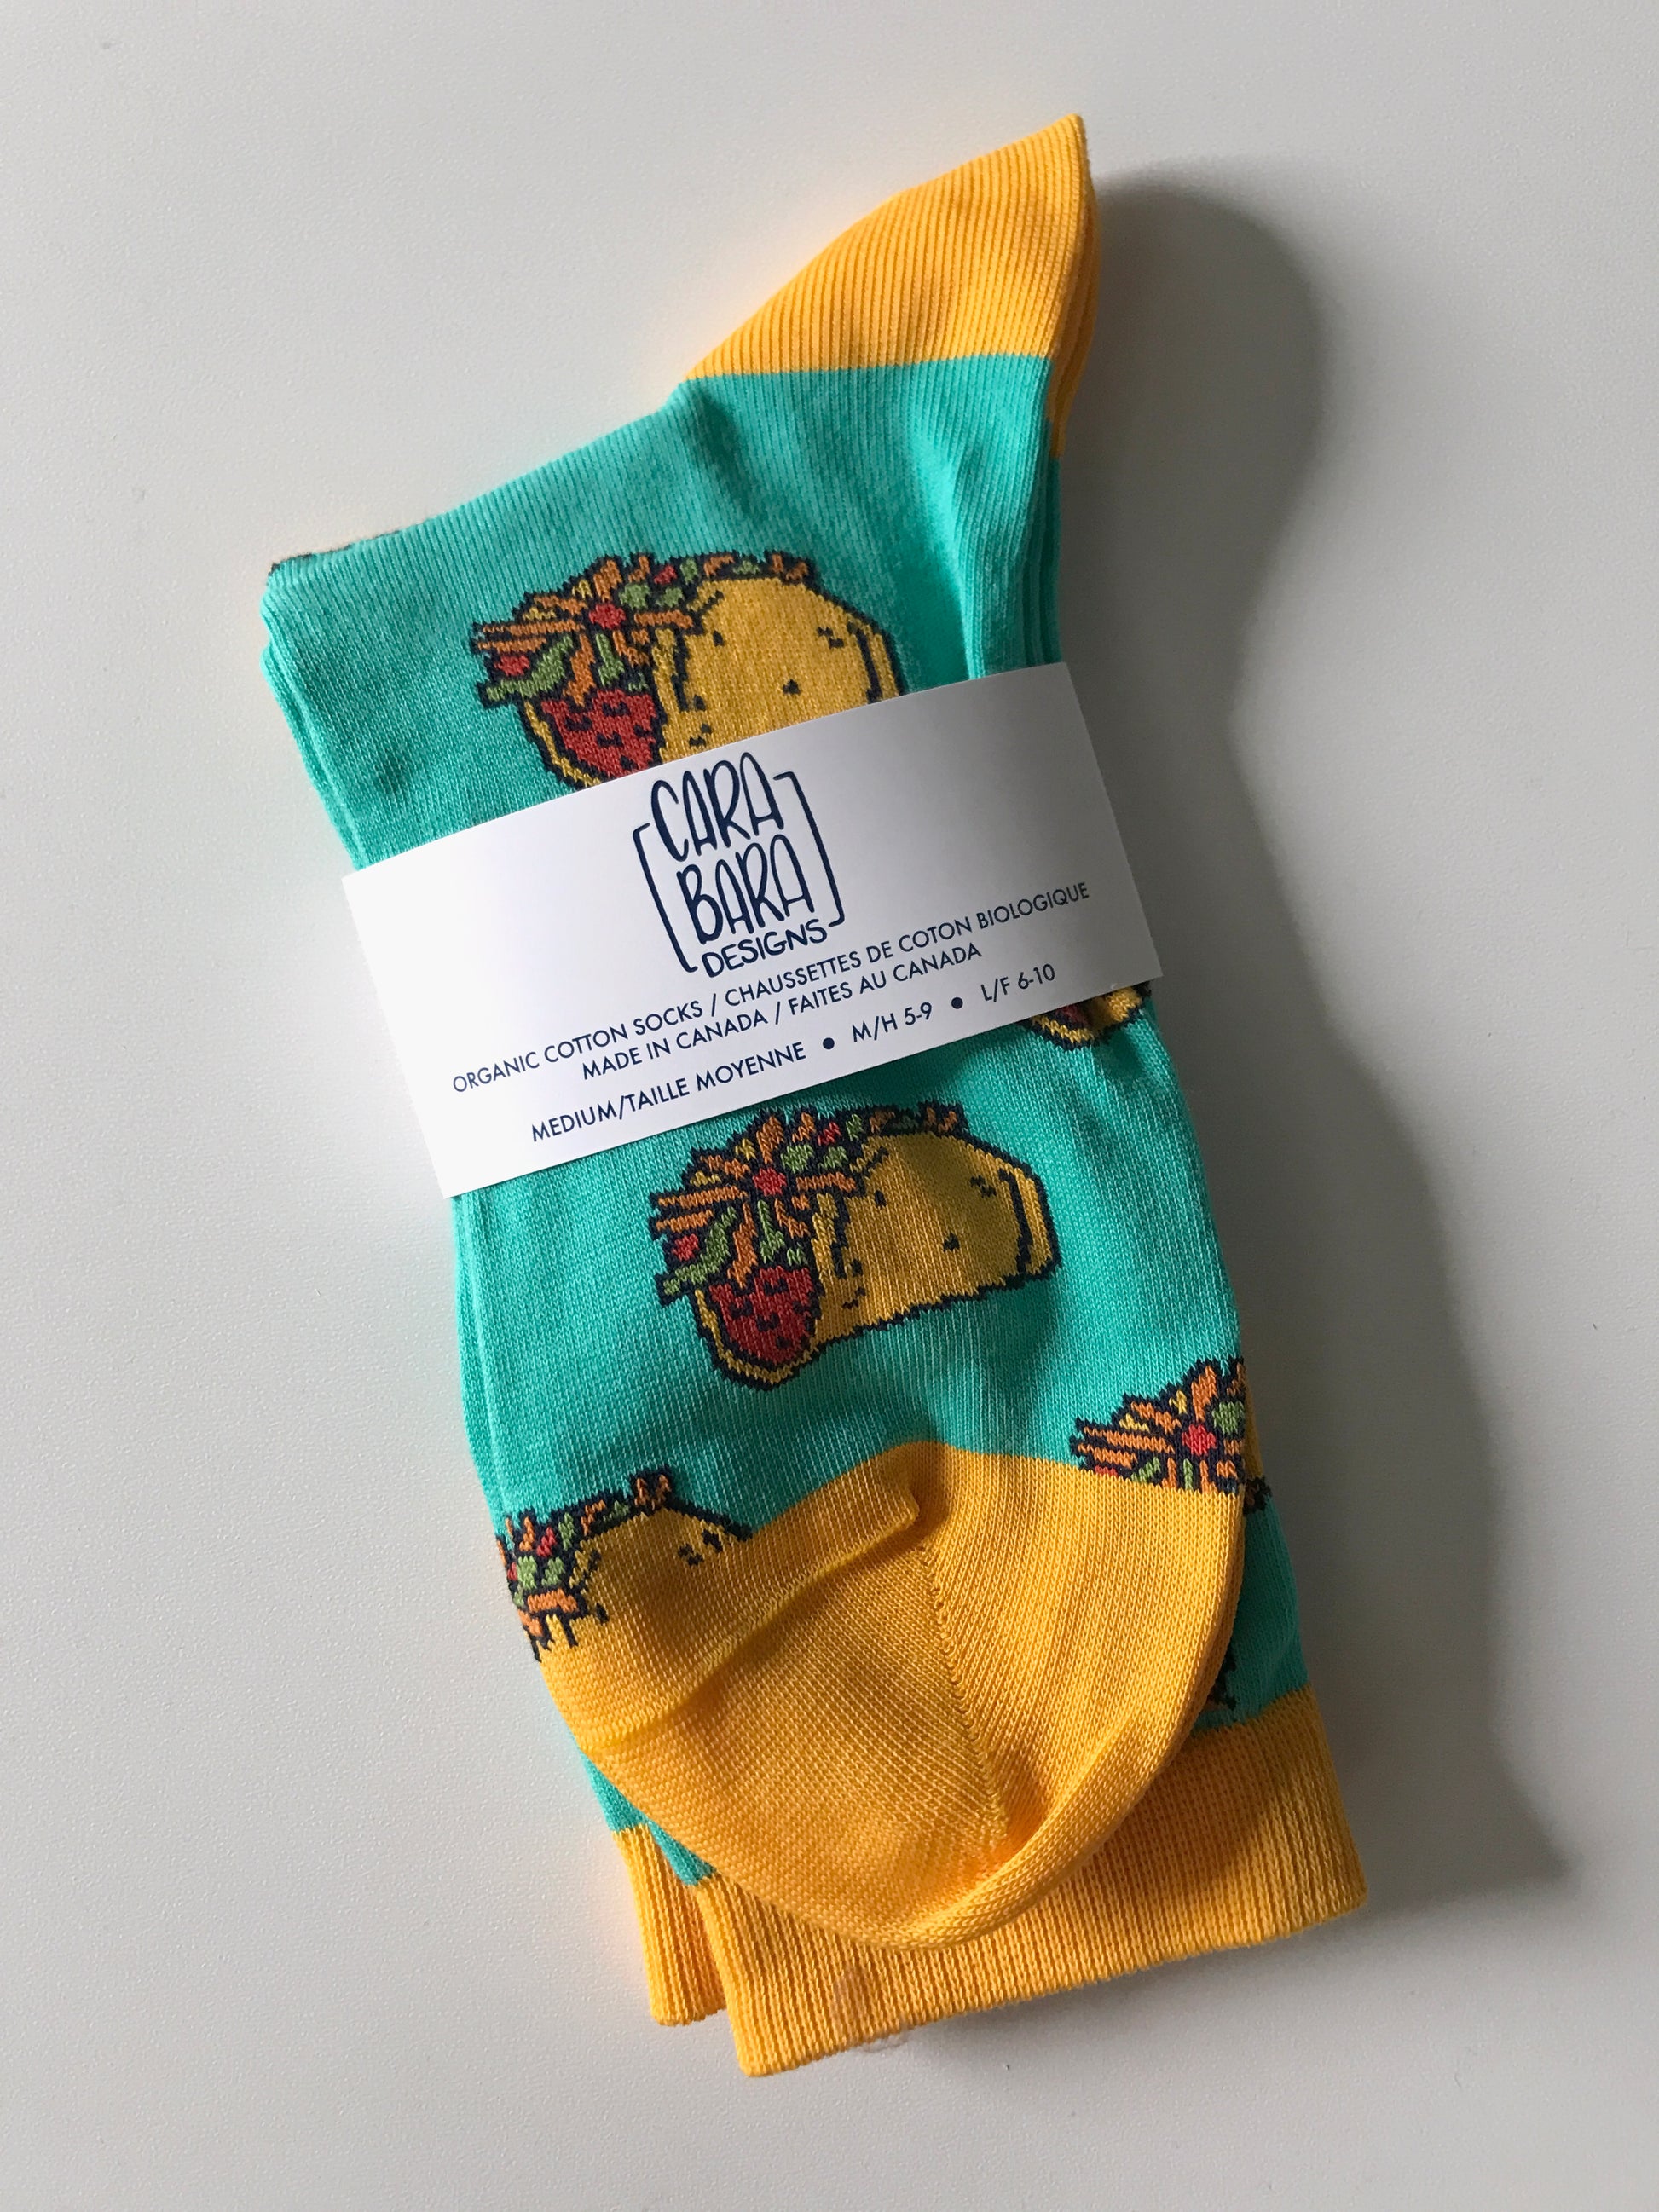 A pair of aqua-blue socks with yellow accents is patterned with tacos and is folded and labelled with a belly band with the Carabara Designs logo and the words organic cotton socks made in Canada, size medium, in English and French.